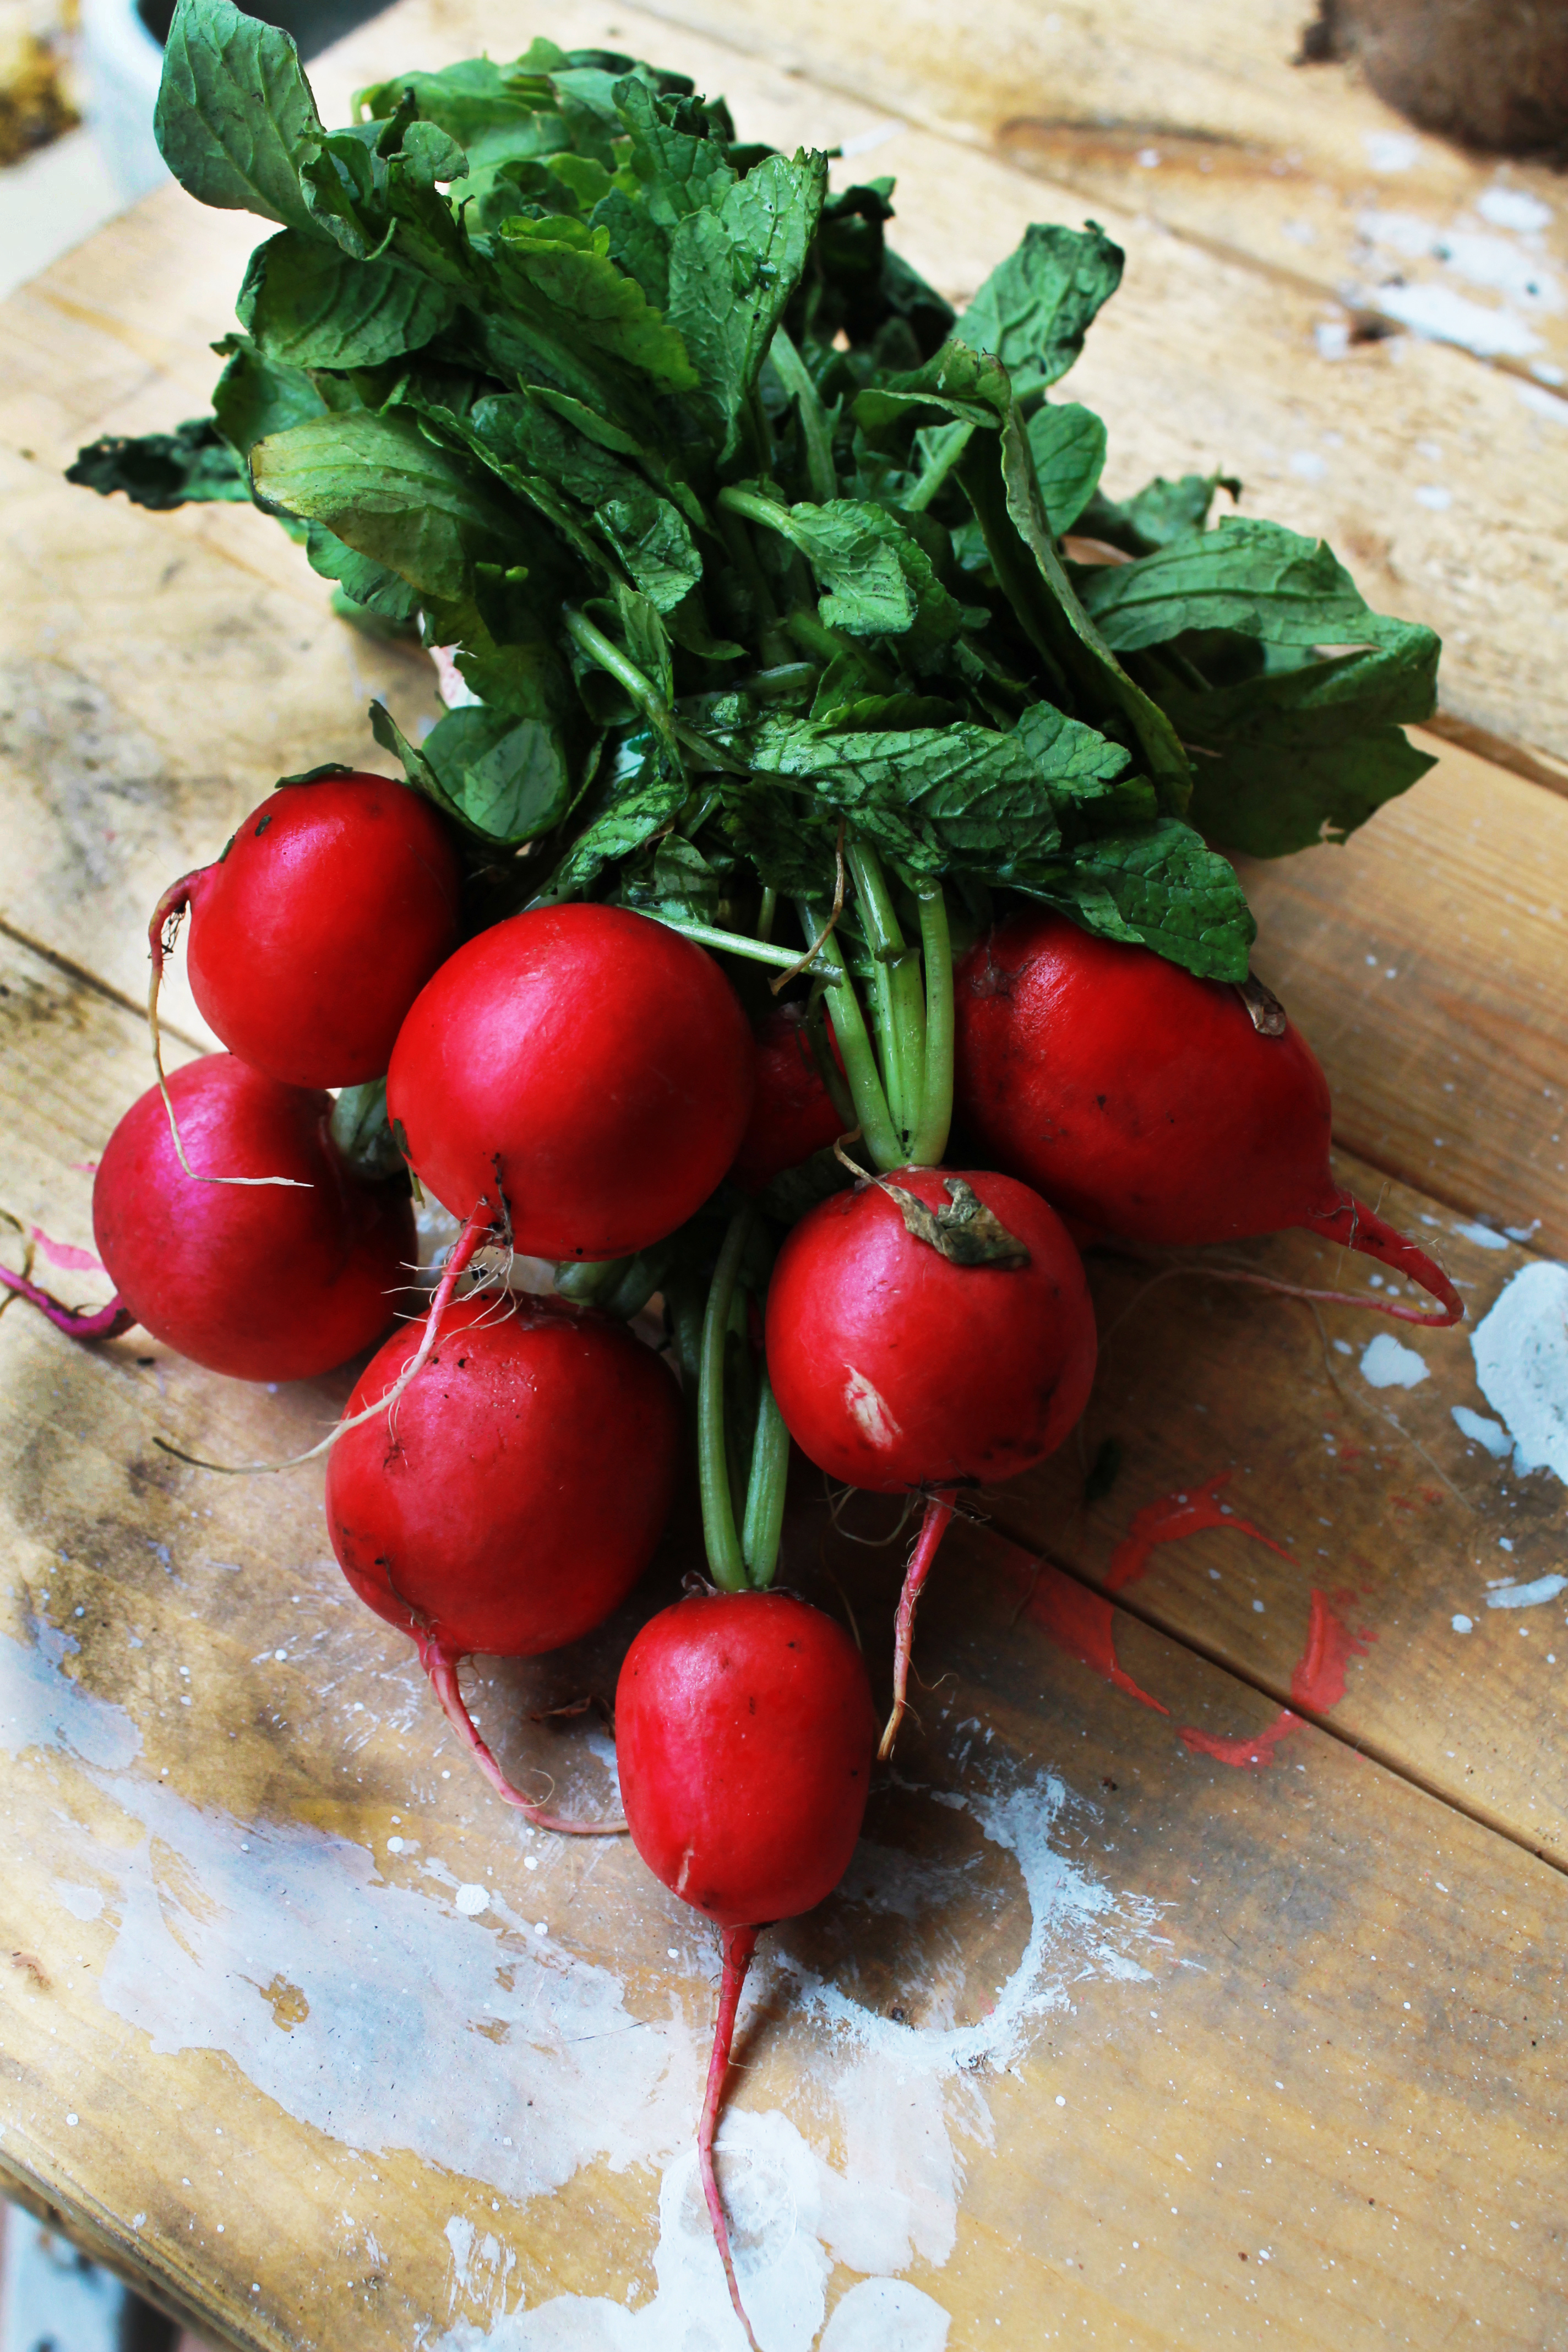 “As God is my witness, I’ll never be hungry again!” – Radishes to the rescue!